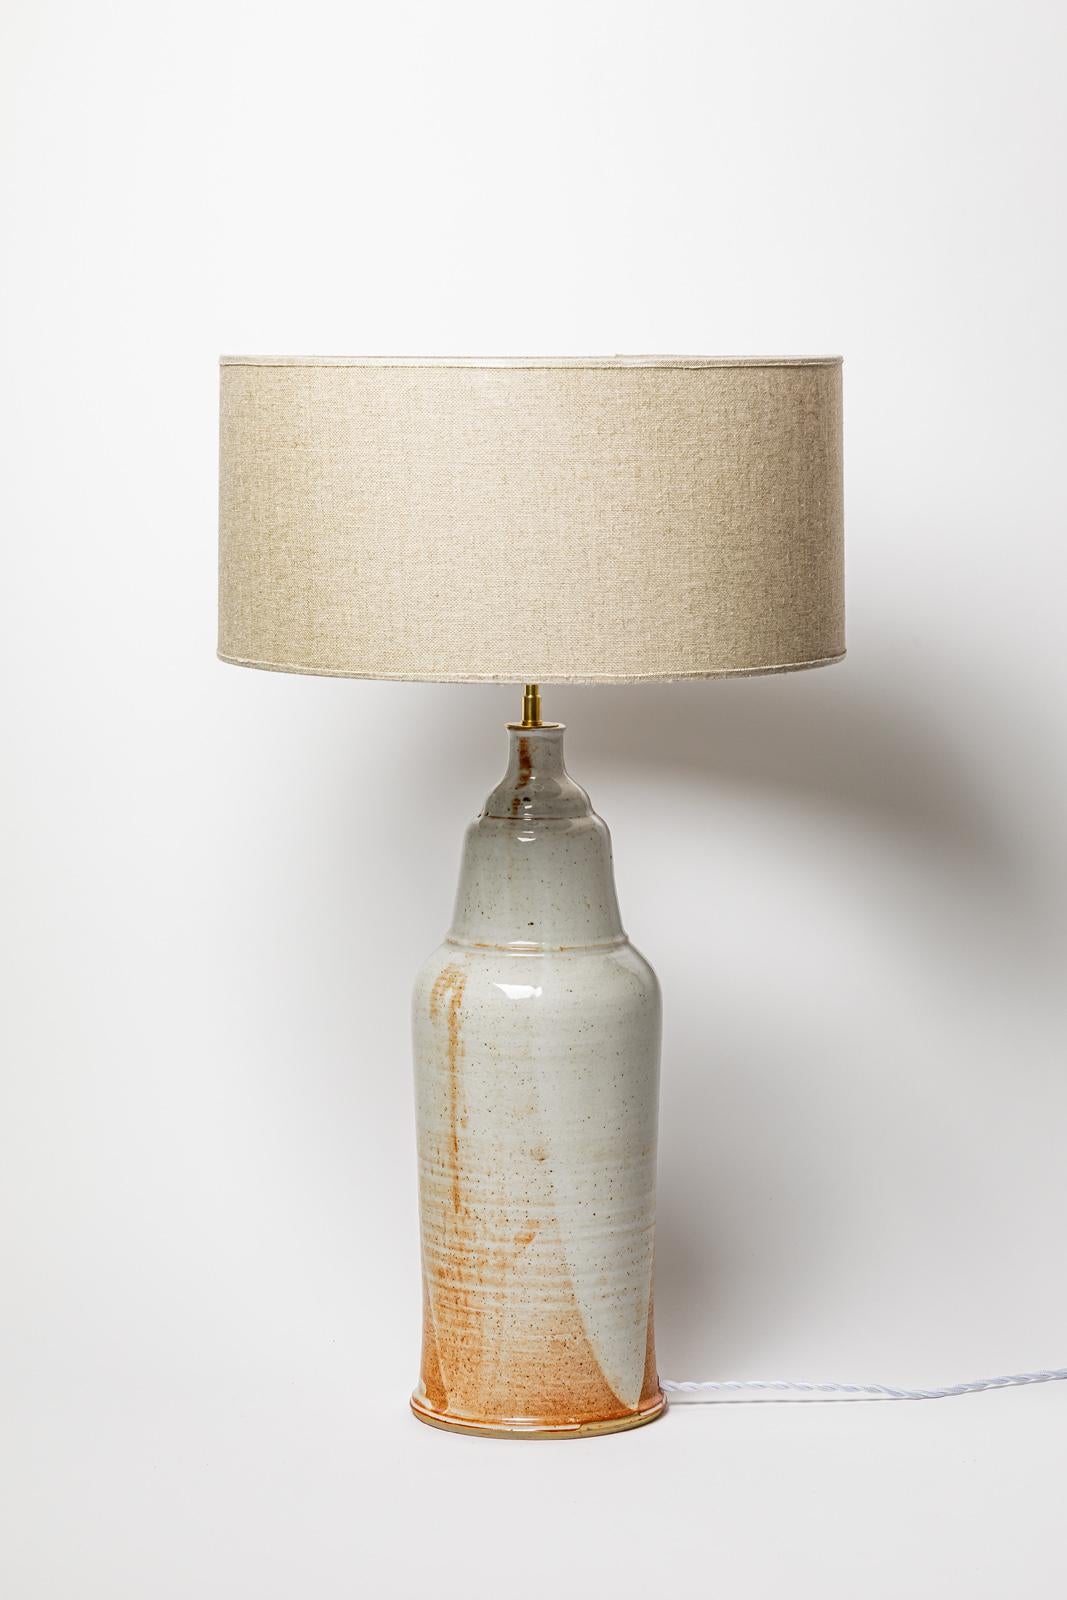 20th Century Blanot large 20th century design white and brown ceramic table lamp 46 cm For Sale